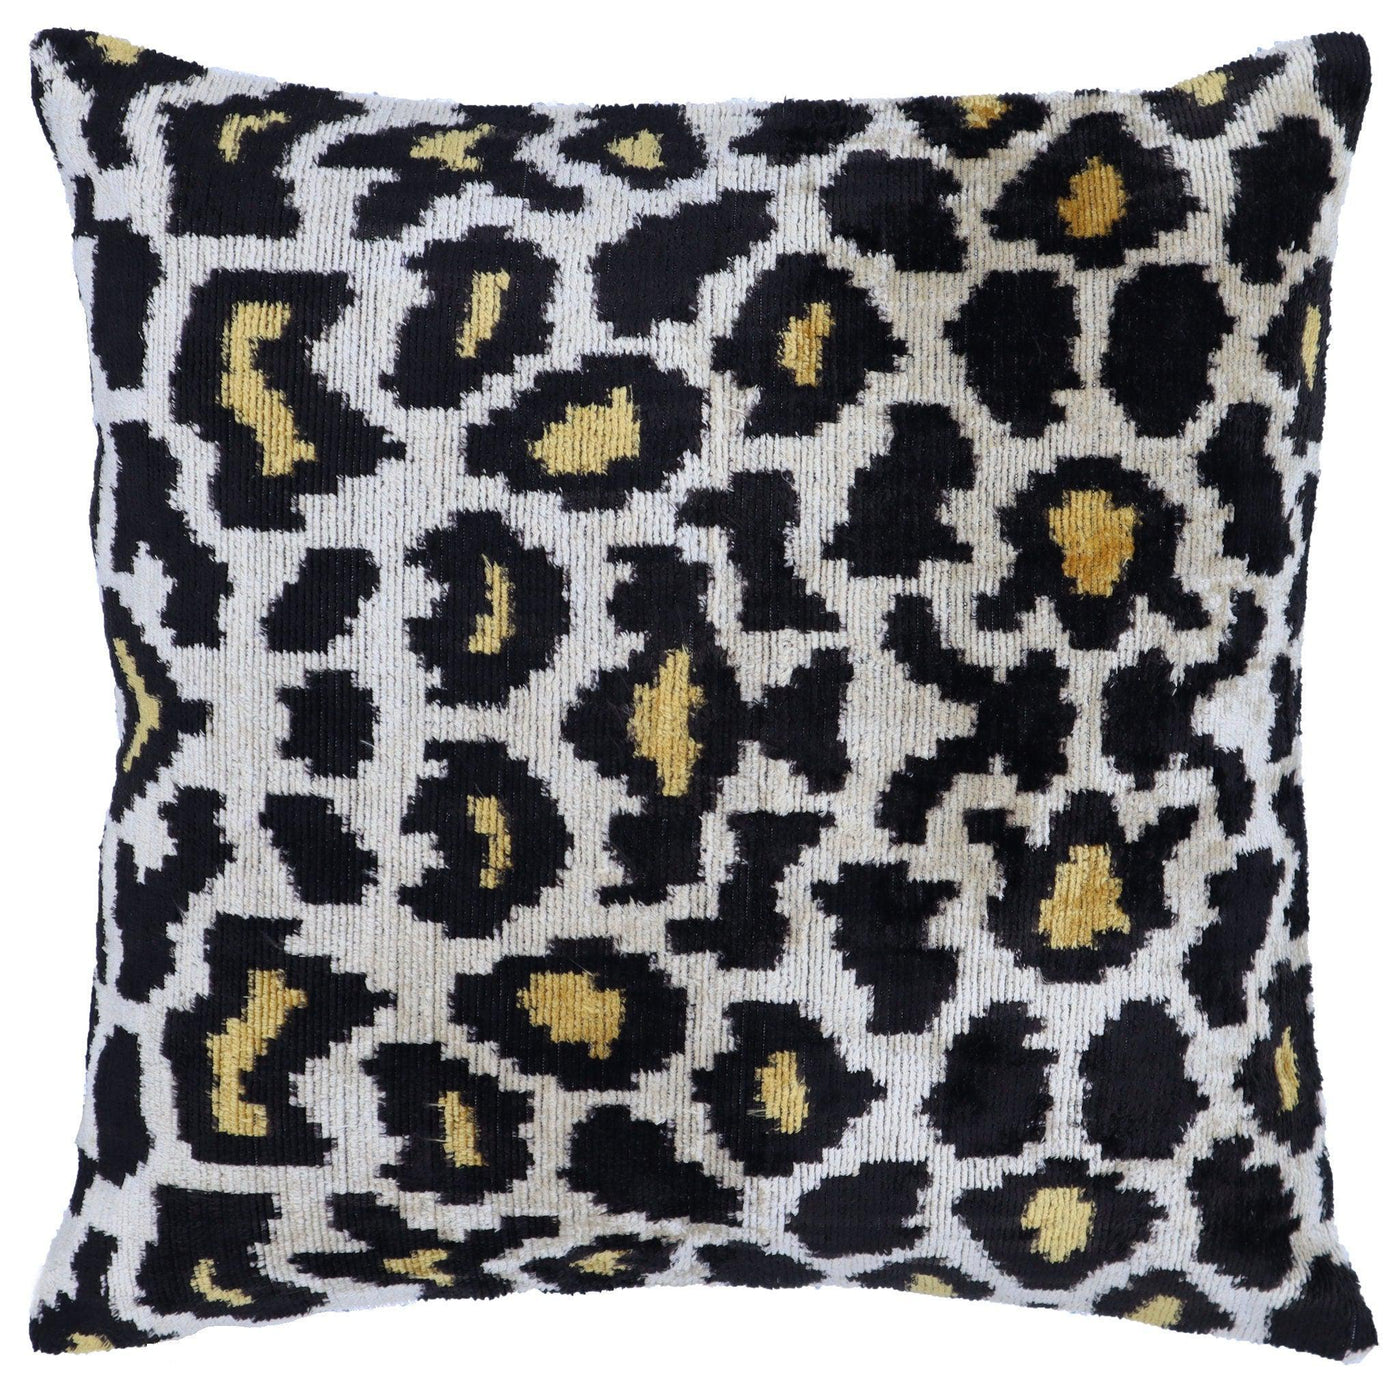 Canvello Luxury Tiger Print Black Square Pillow - 16x16 inch